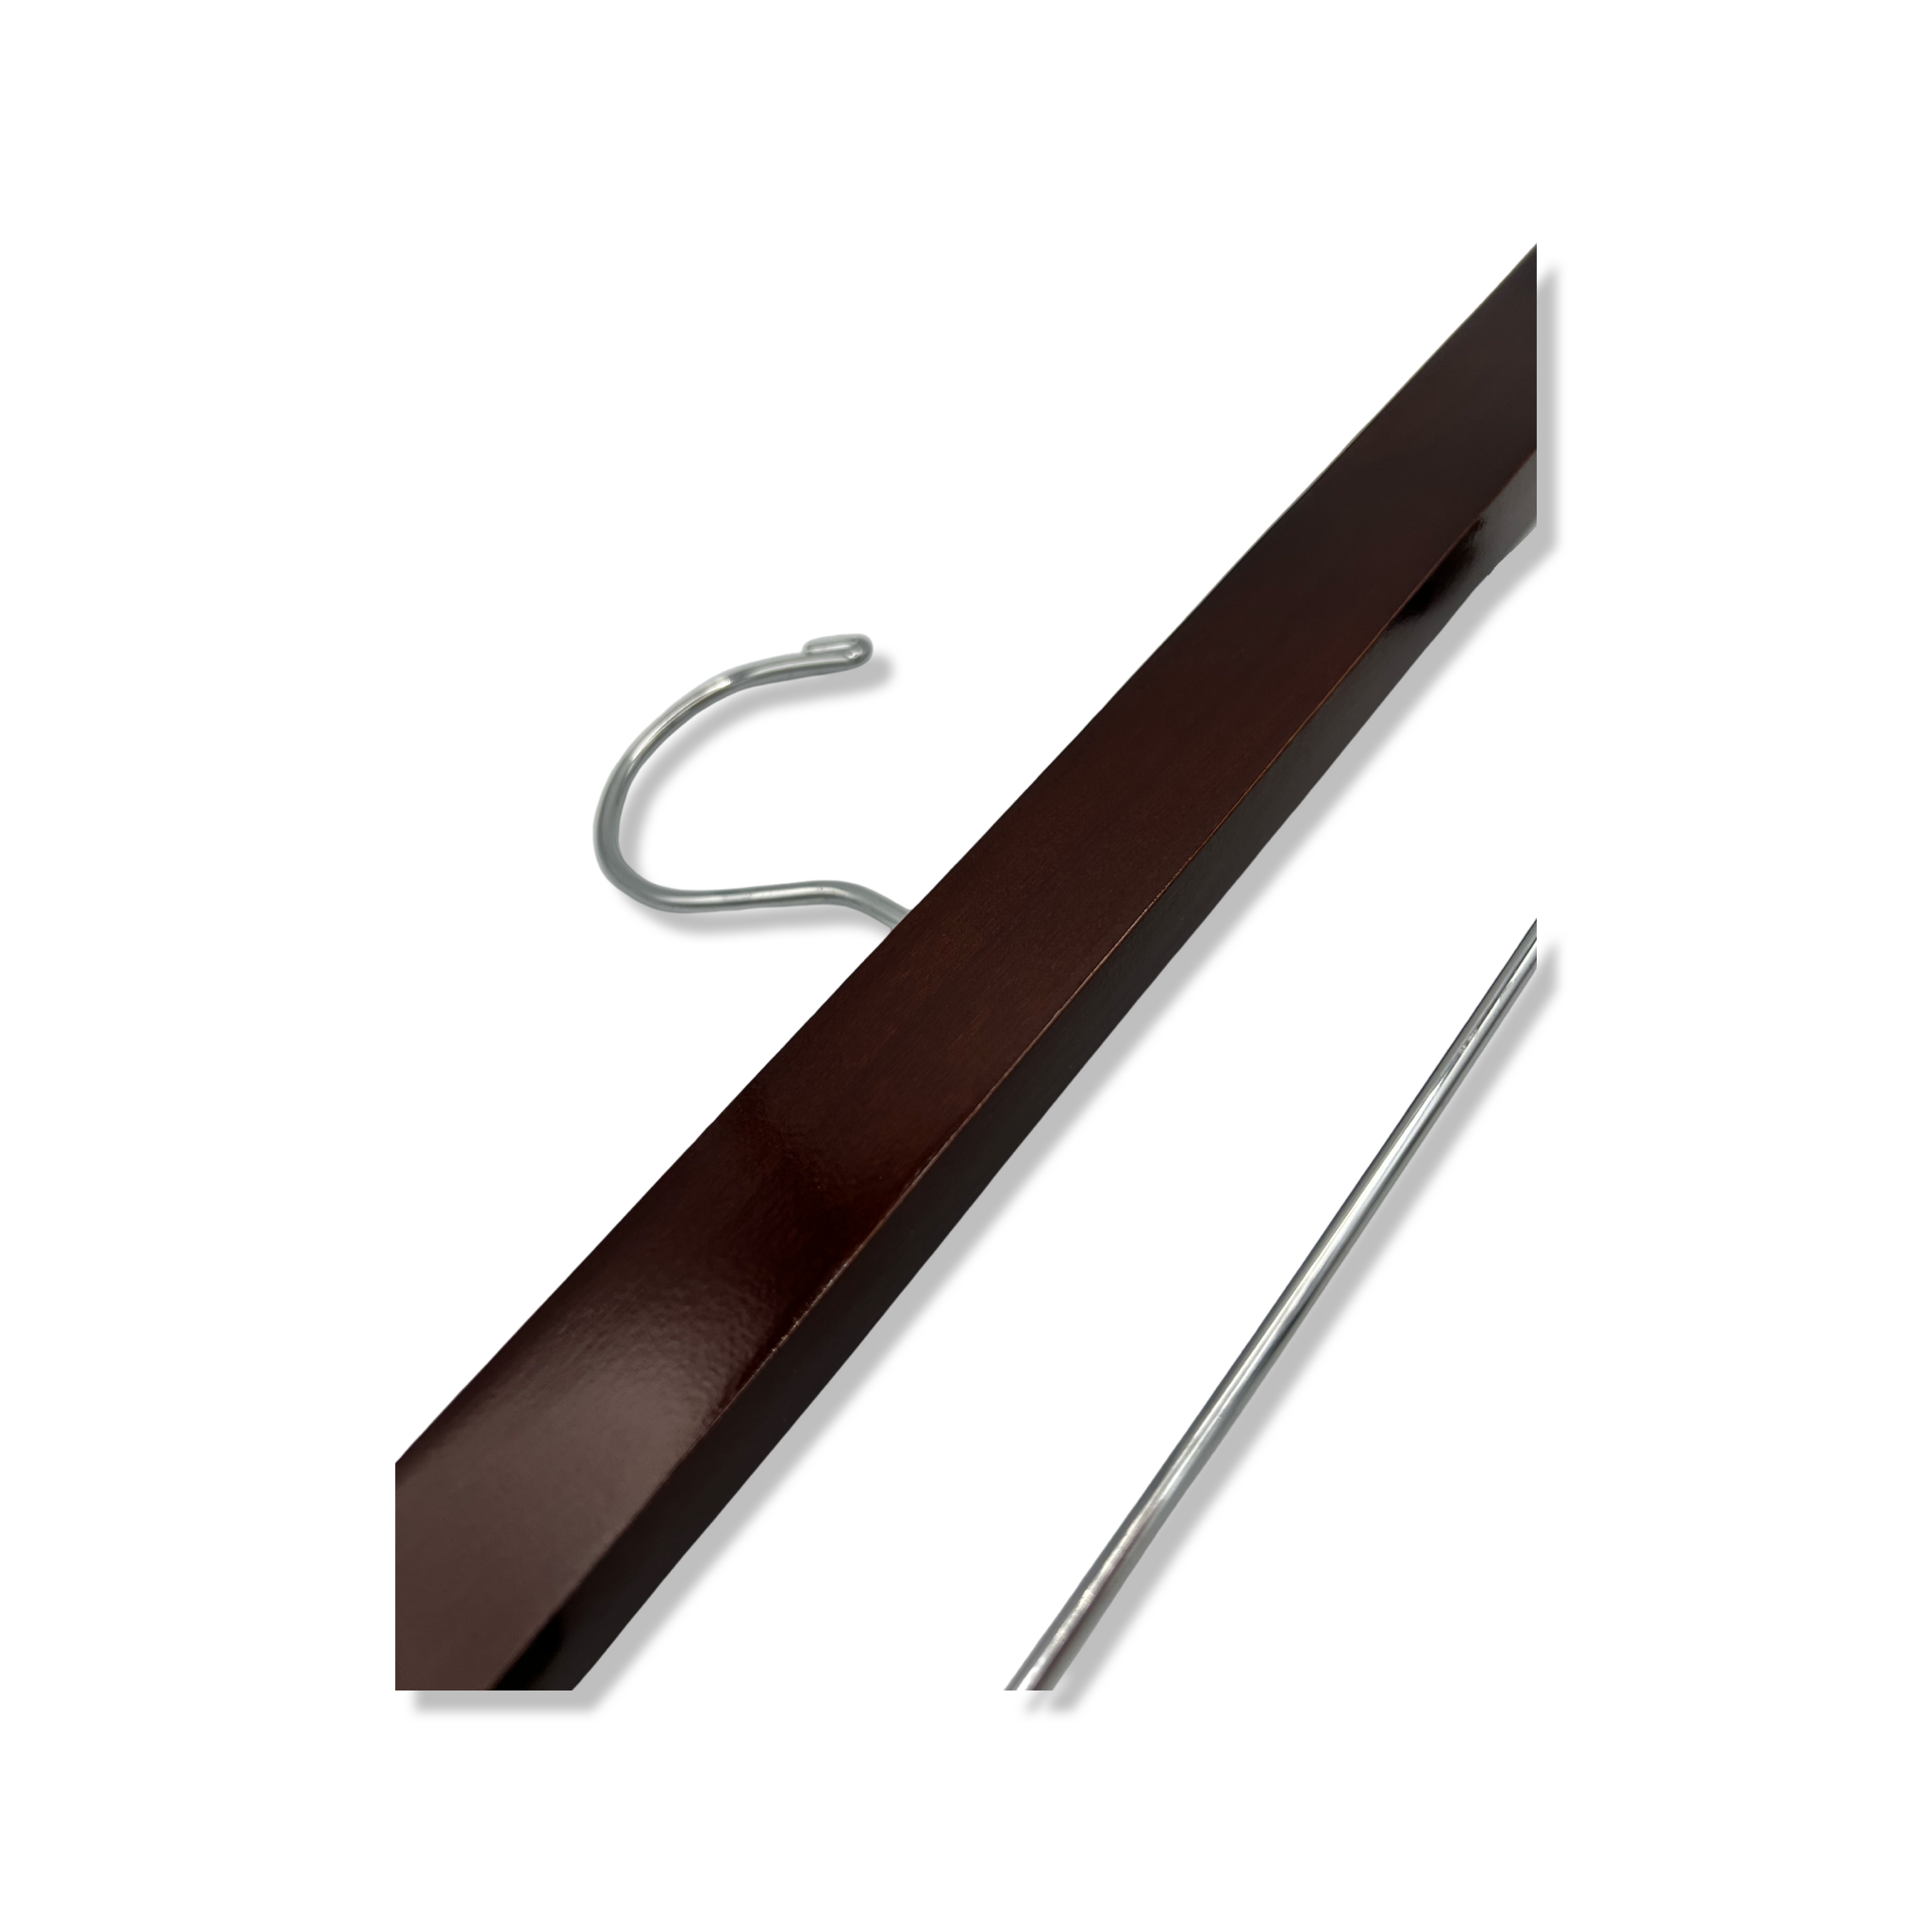 Luxury quality Dark Walnut Wooden Bottom Hanger with silver, adjustable pant bar clips lying down